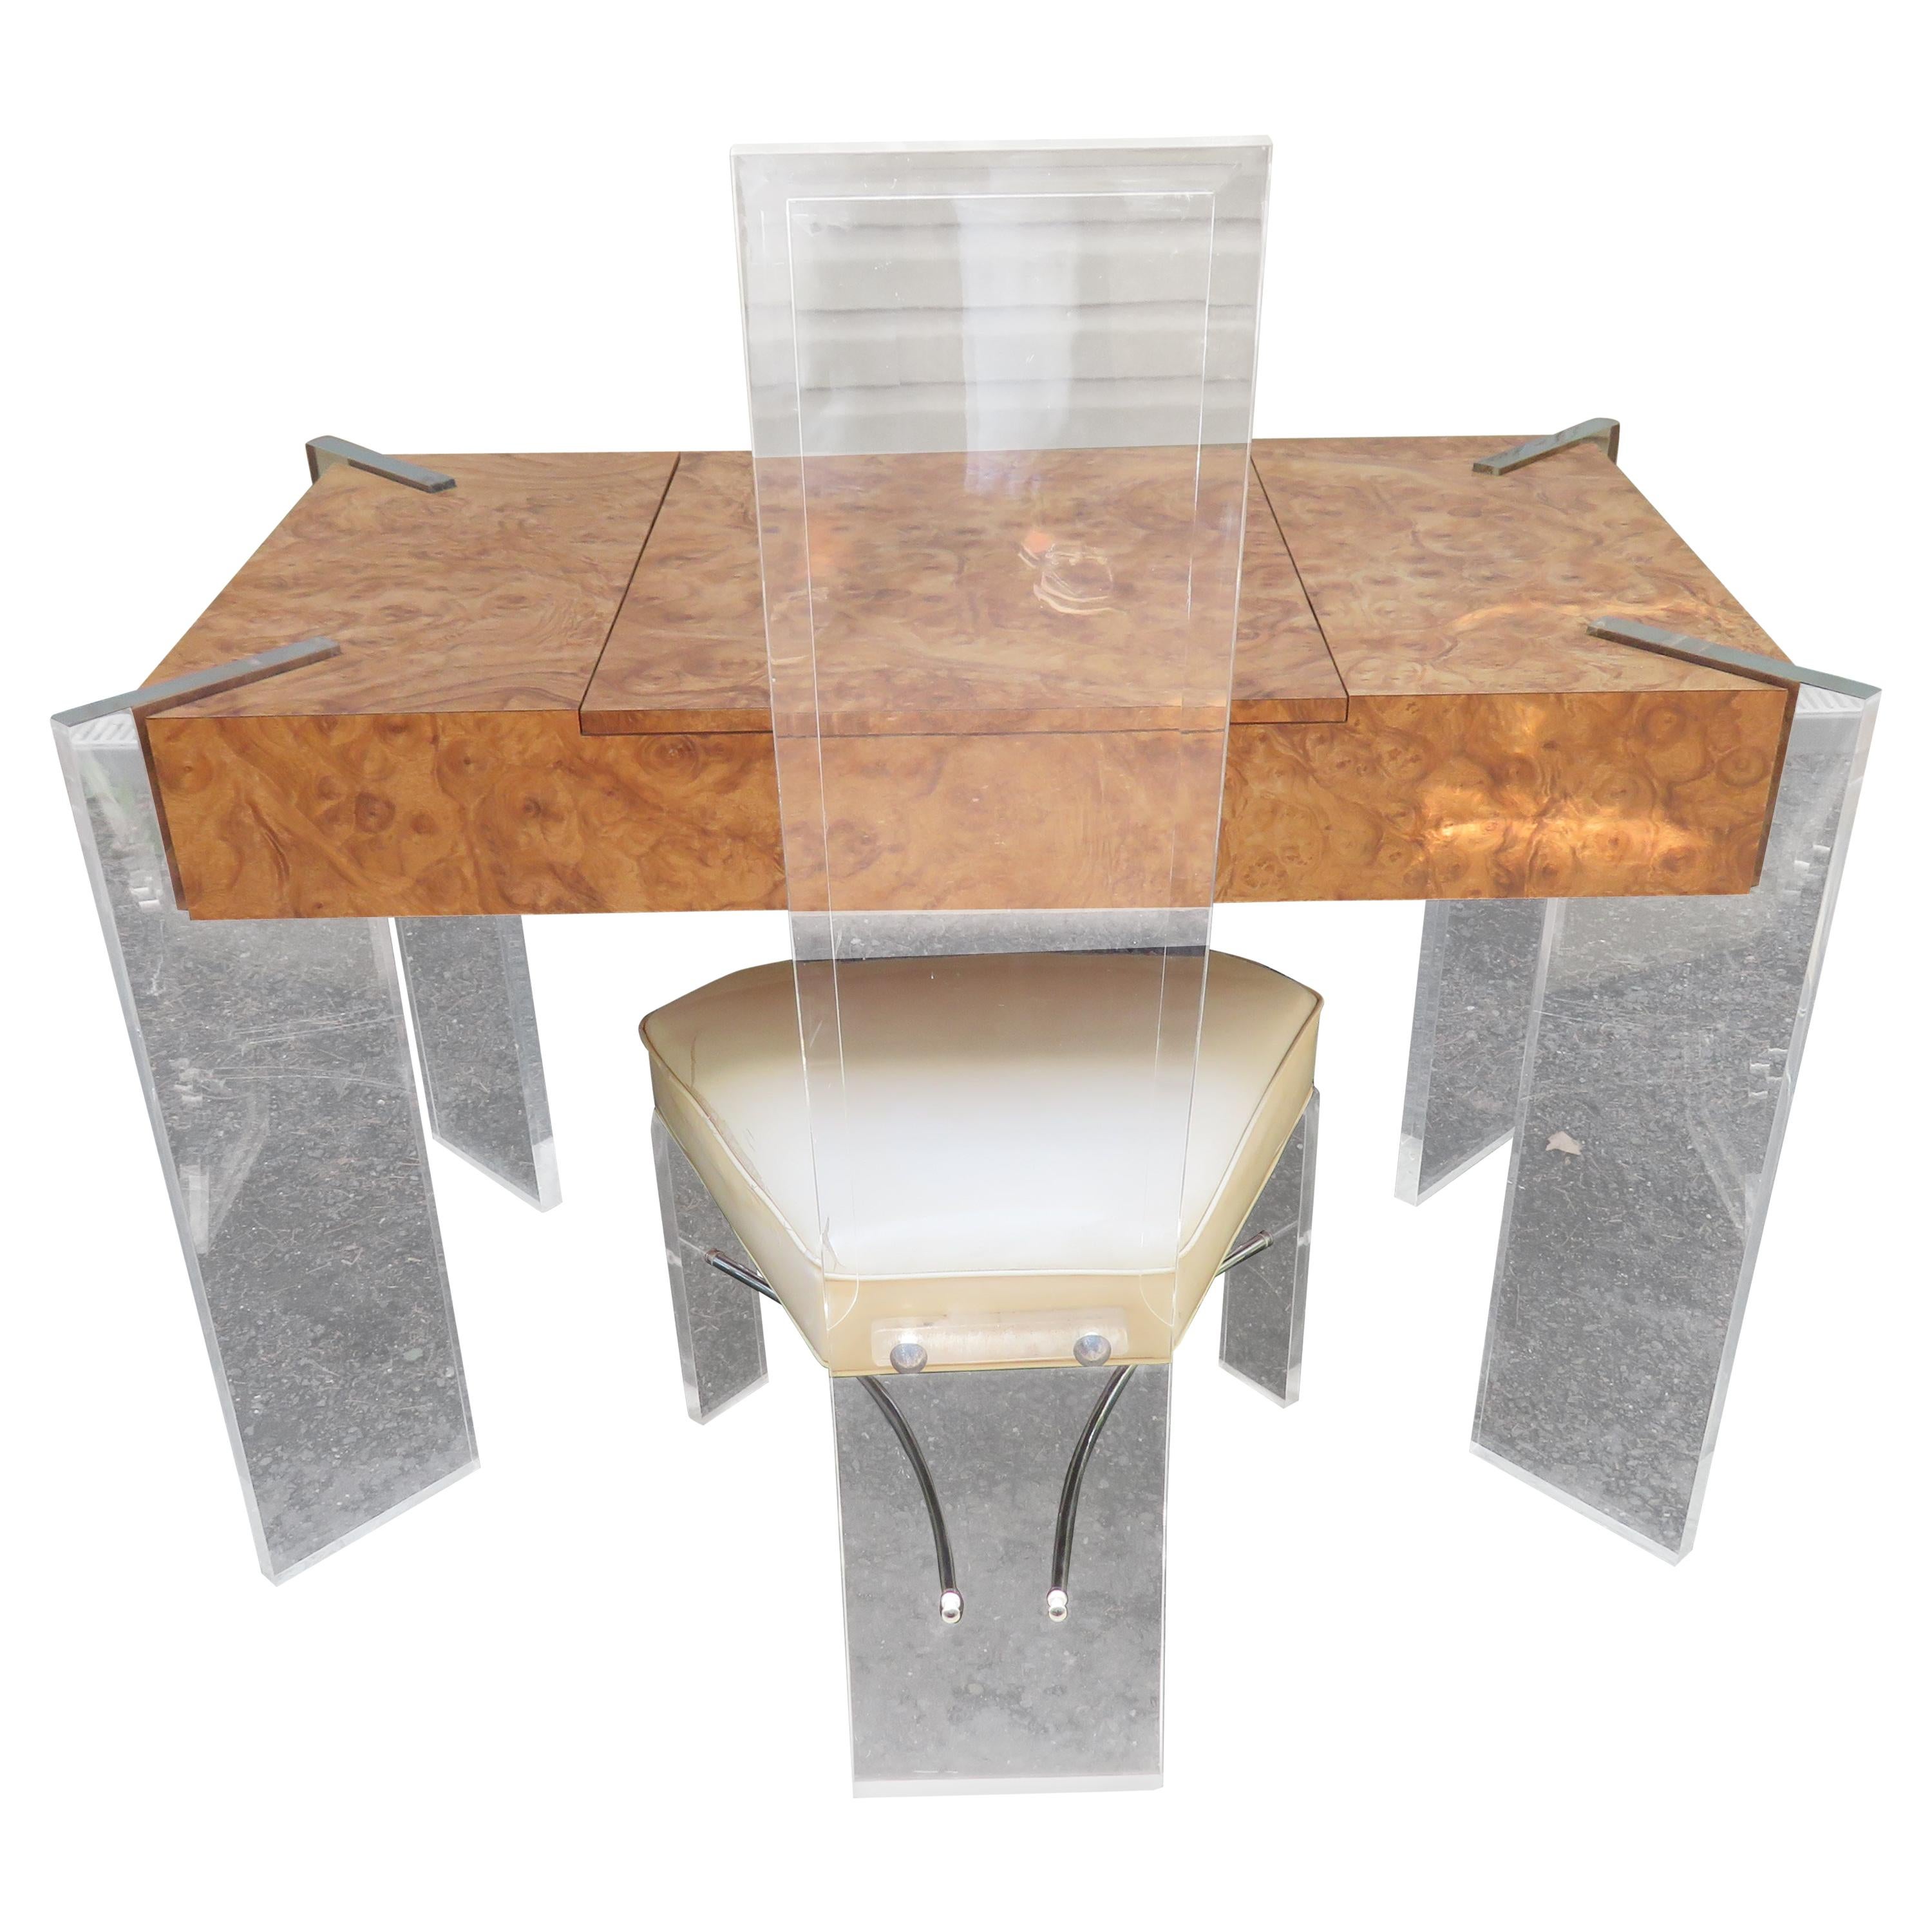 Handsome Burl Laminate Game Table Desk with Lucite Chair